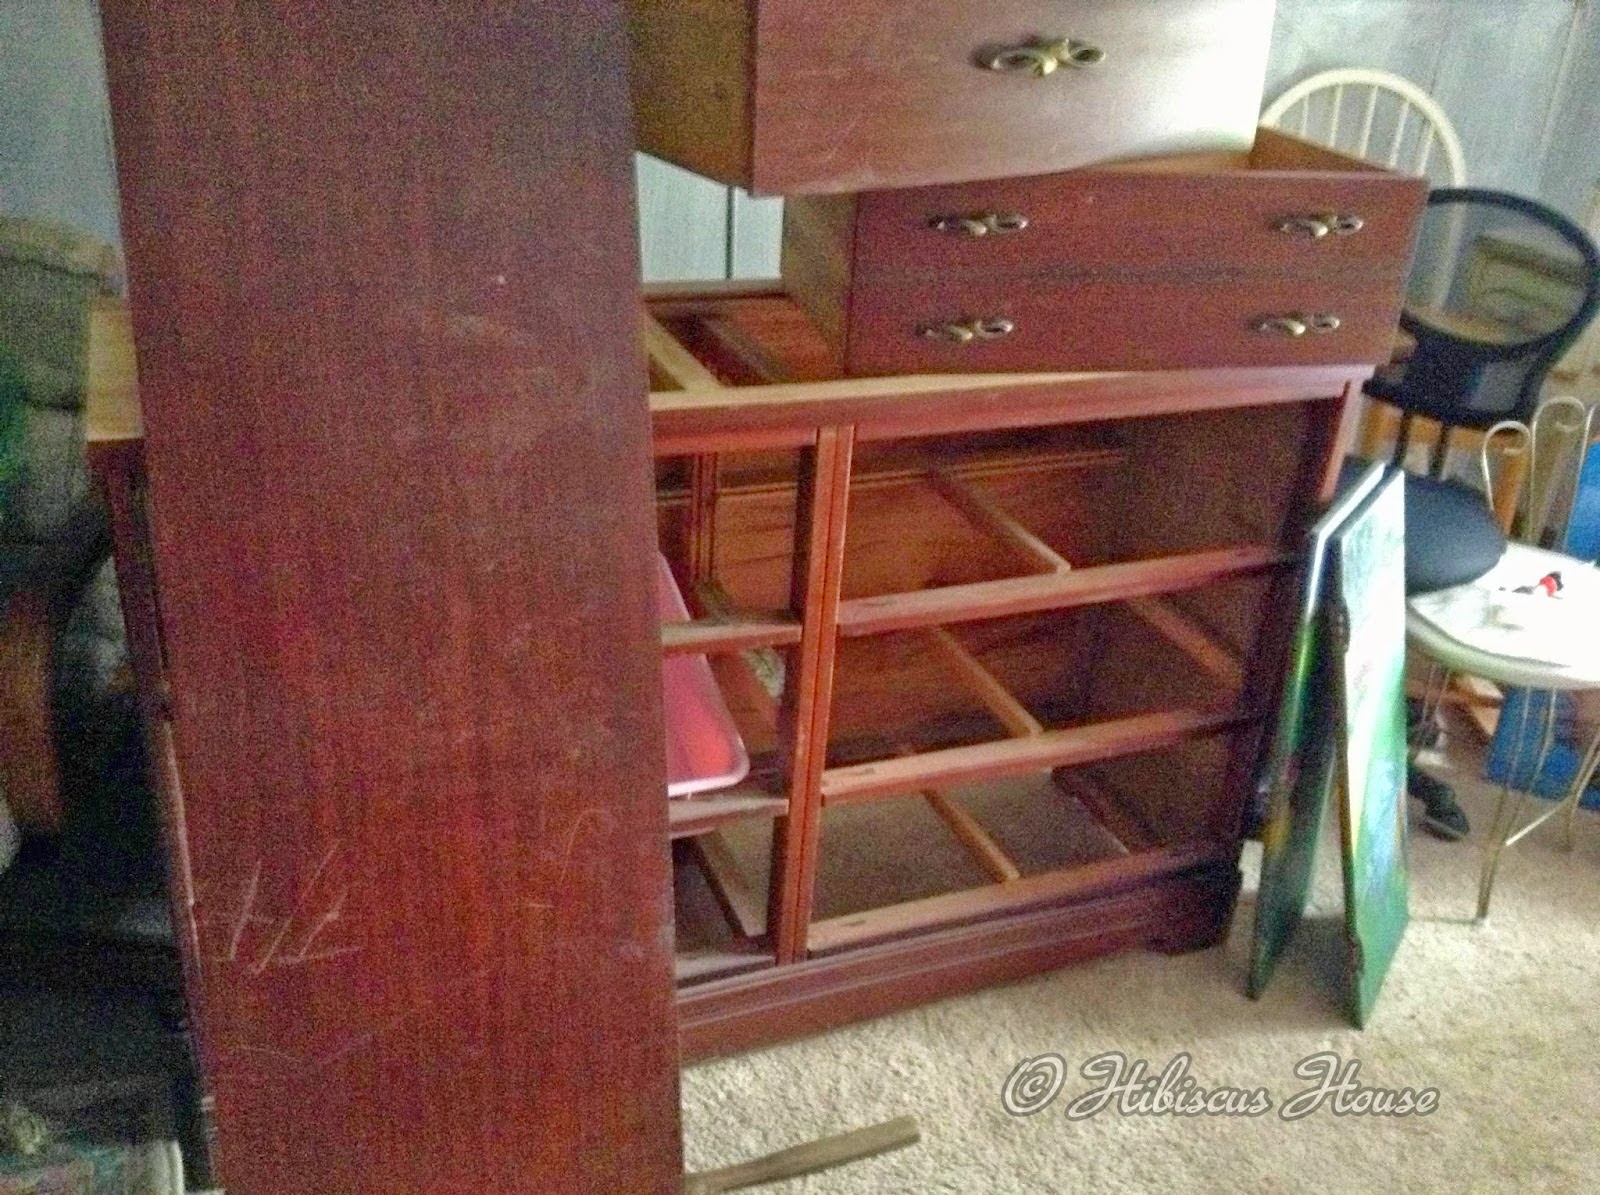 Hibiscus House Repurposing A Dresser For Little To No Cost